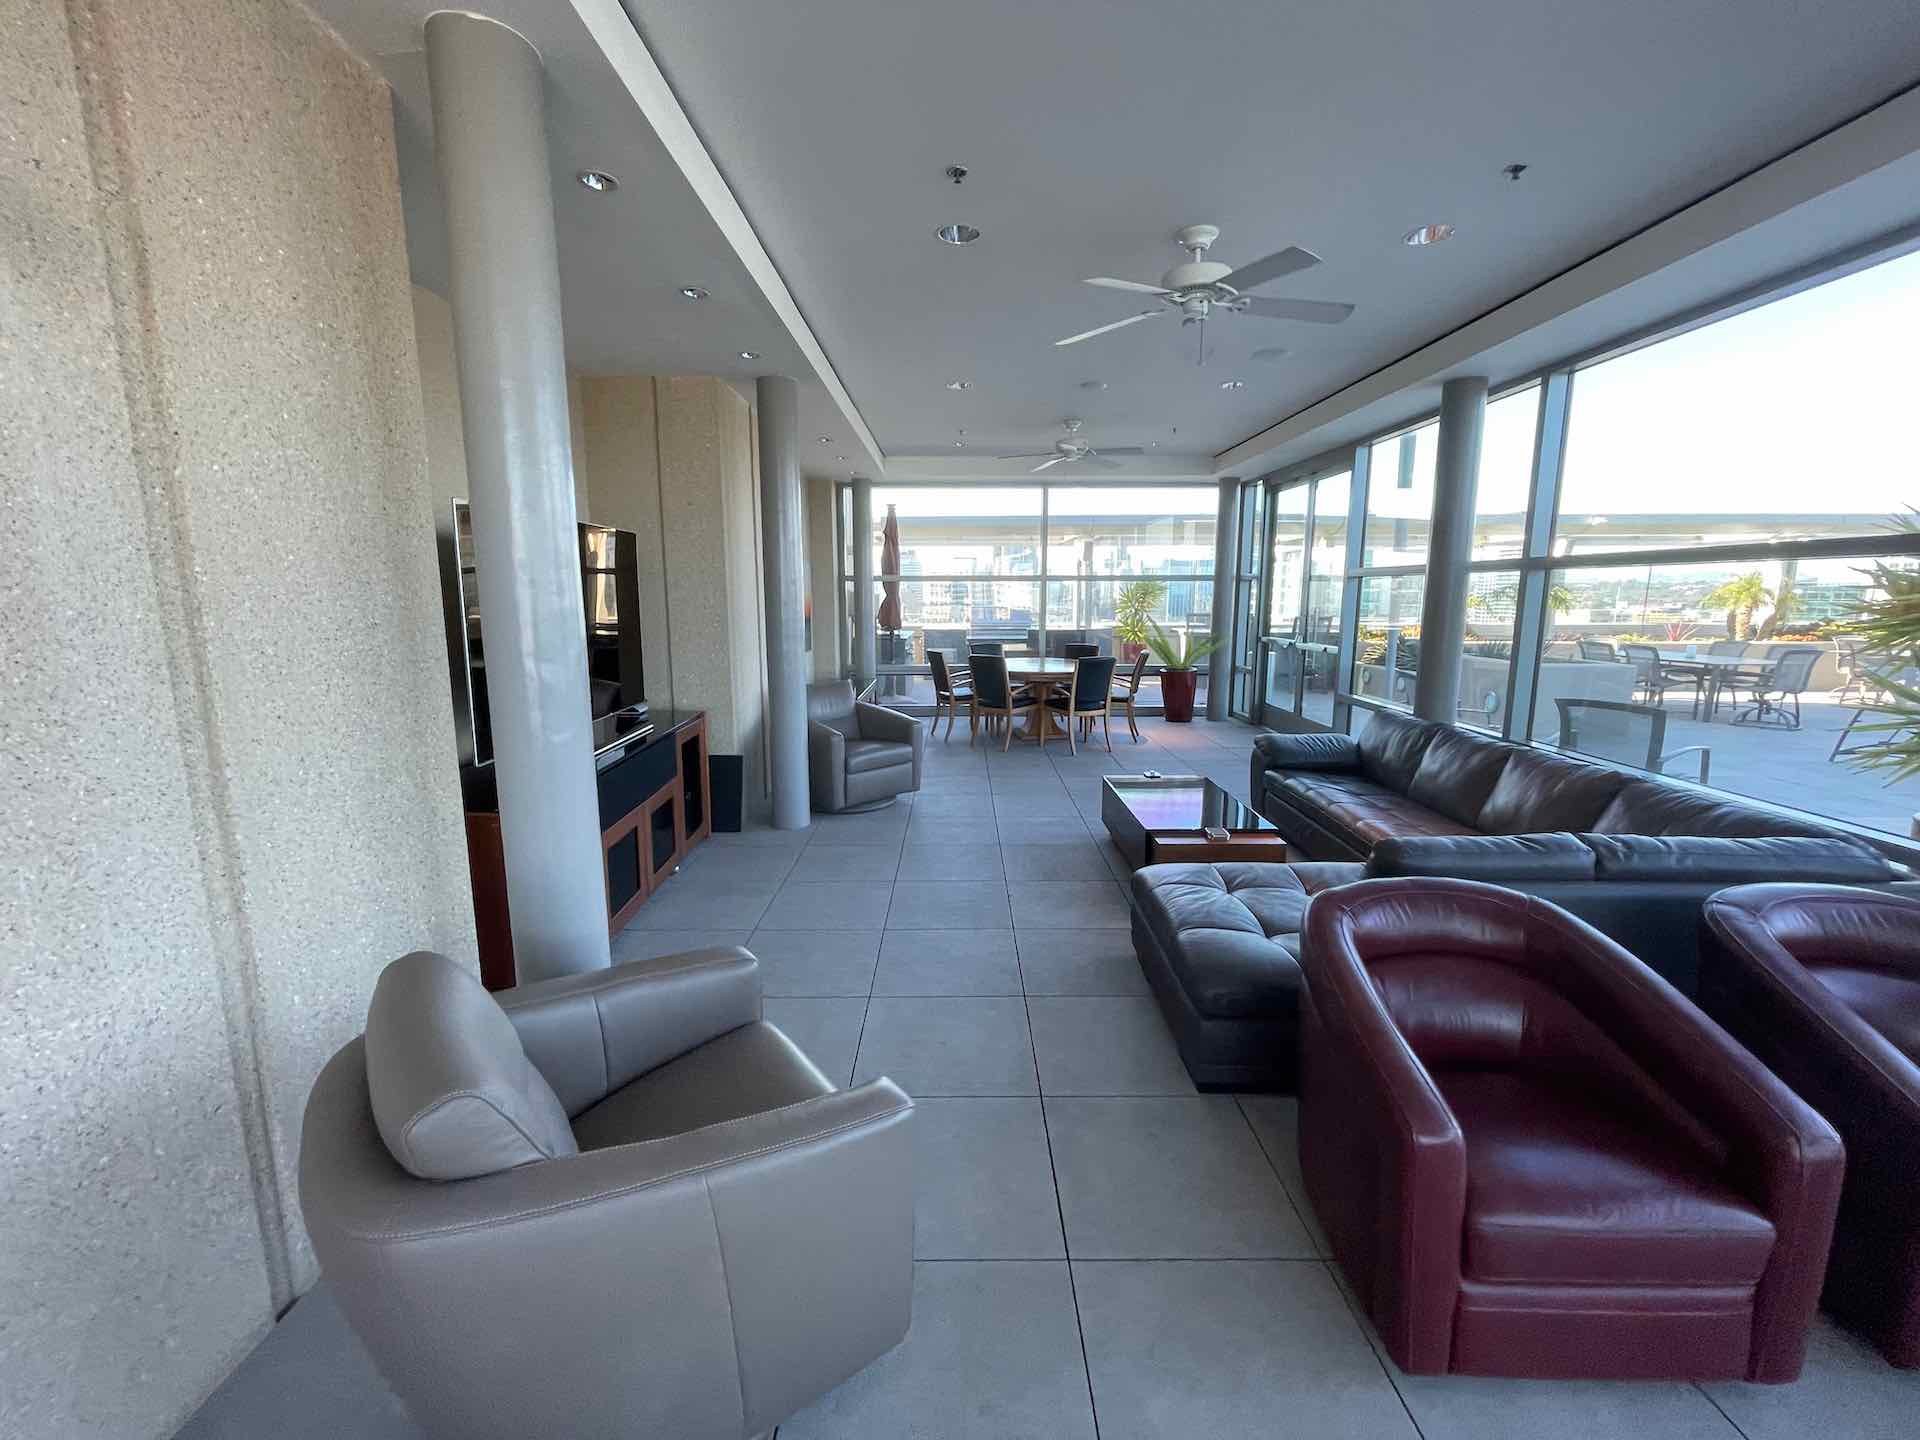 Community lounge room in downtown San Diego high rise condo tower